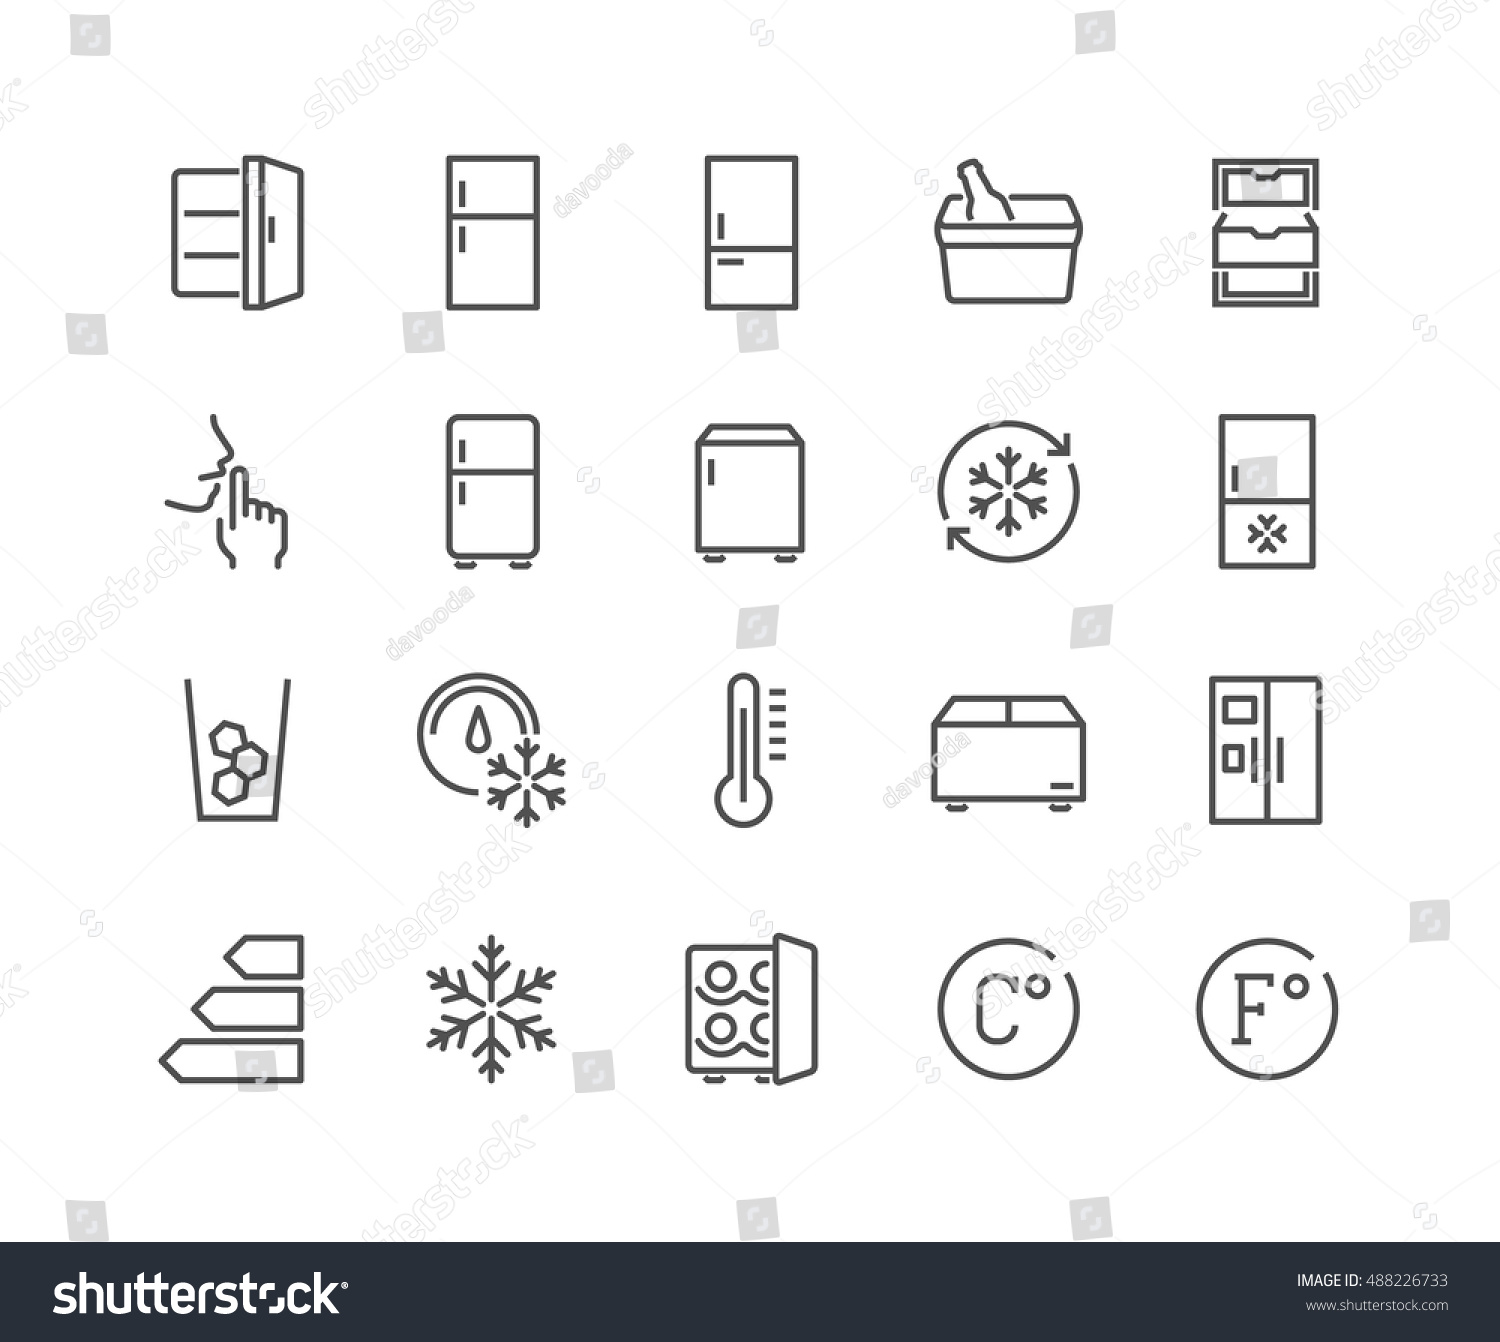 Simple Set of Fridge Related Vector Line Icons. 
Contains such Icons as Portable Fridge, Ice Machine, Silence and more.
Editable Stroke. 48x48 Pixel Perfect. #488226733